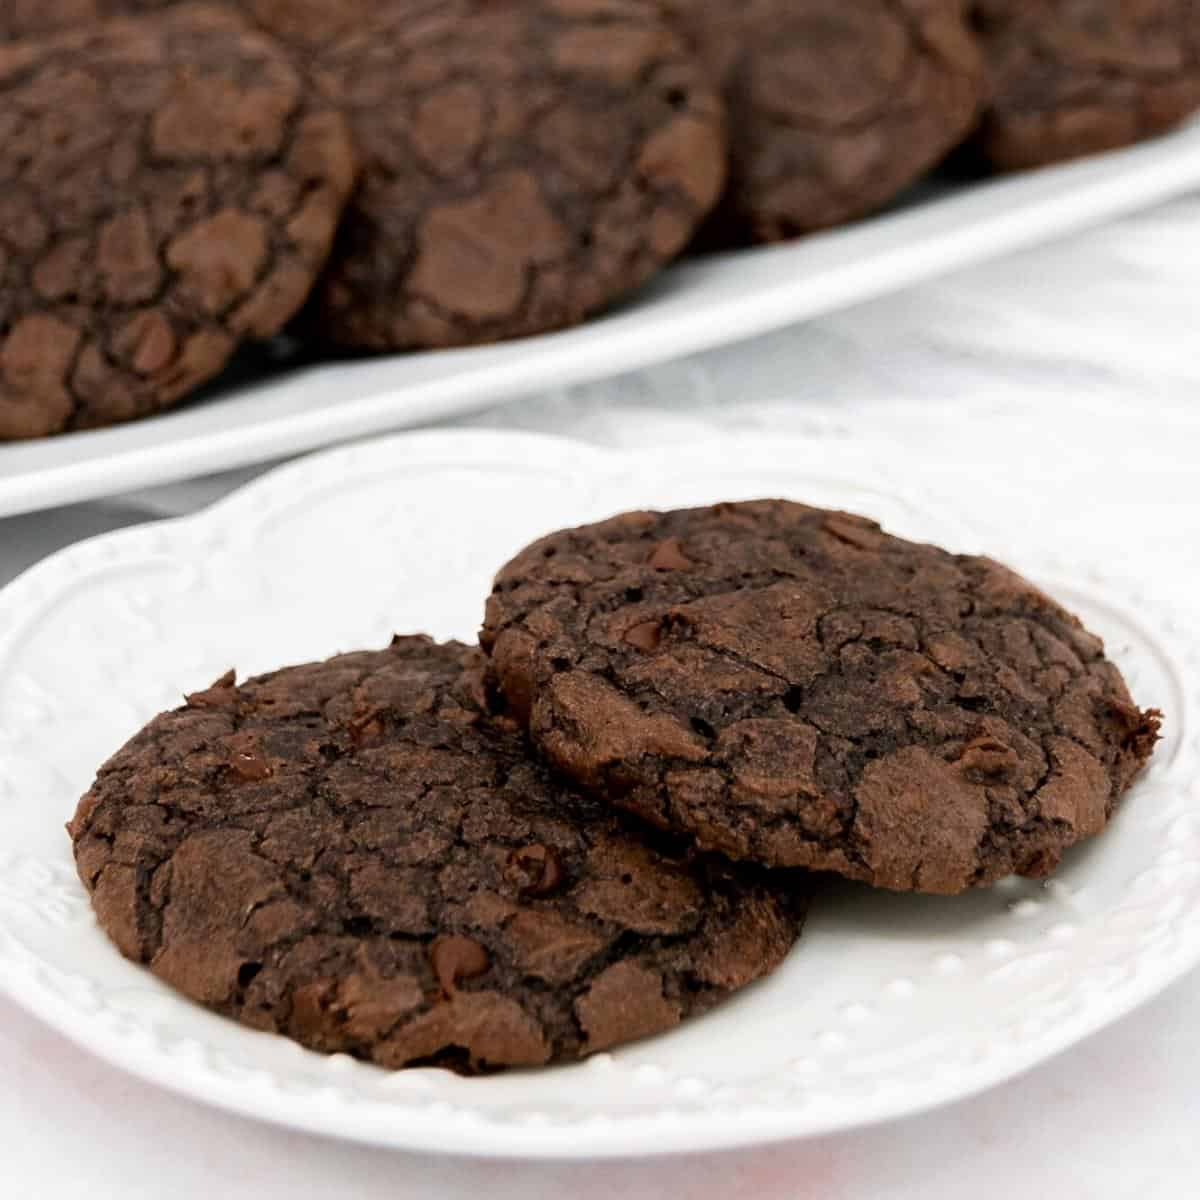 Featured image with brownie cookies on a white plate.